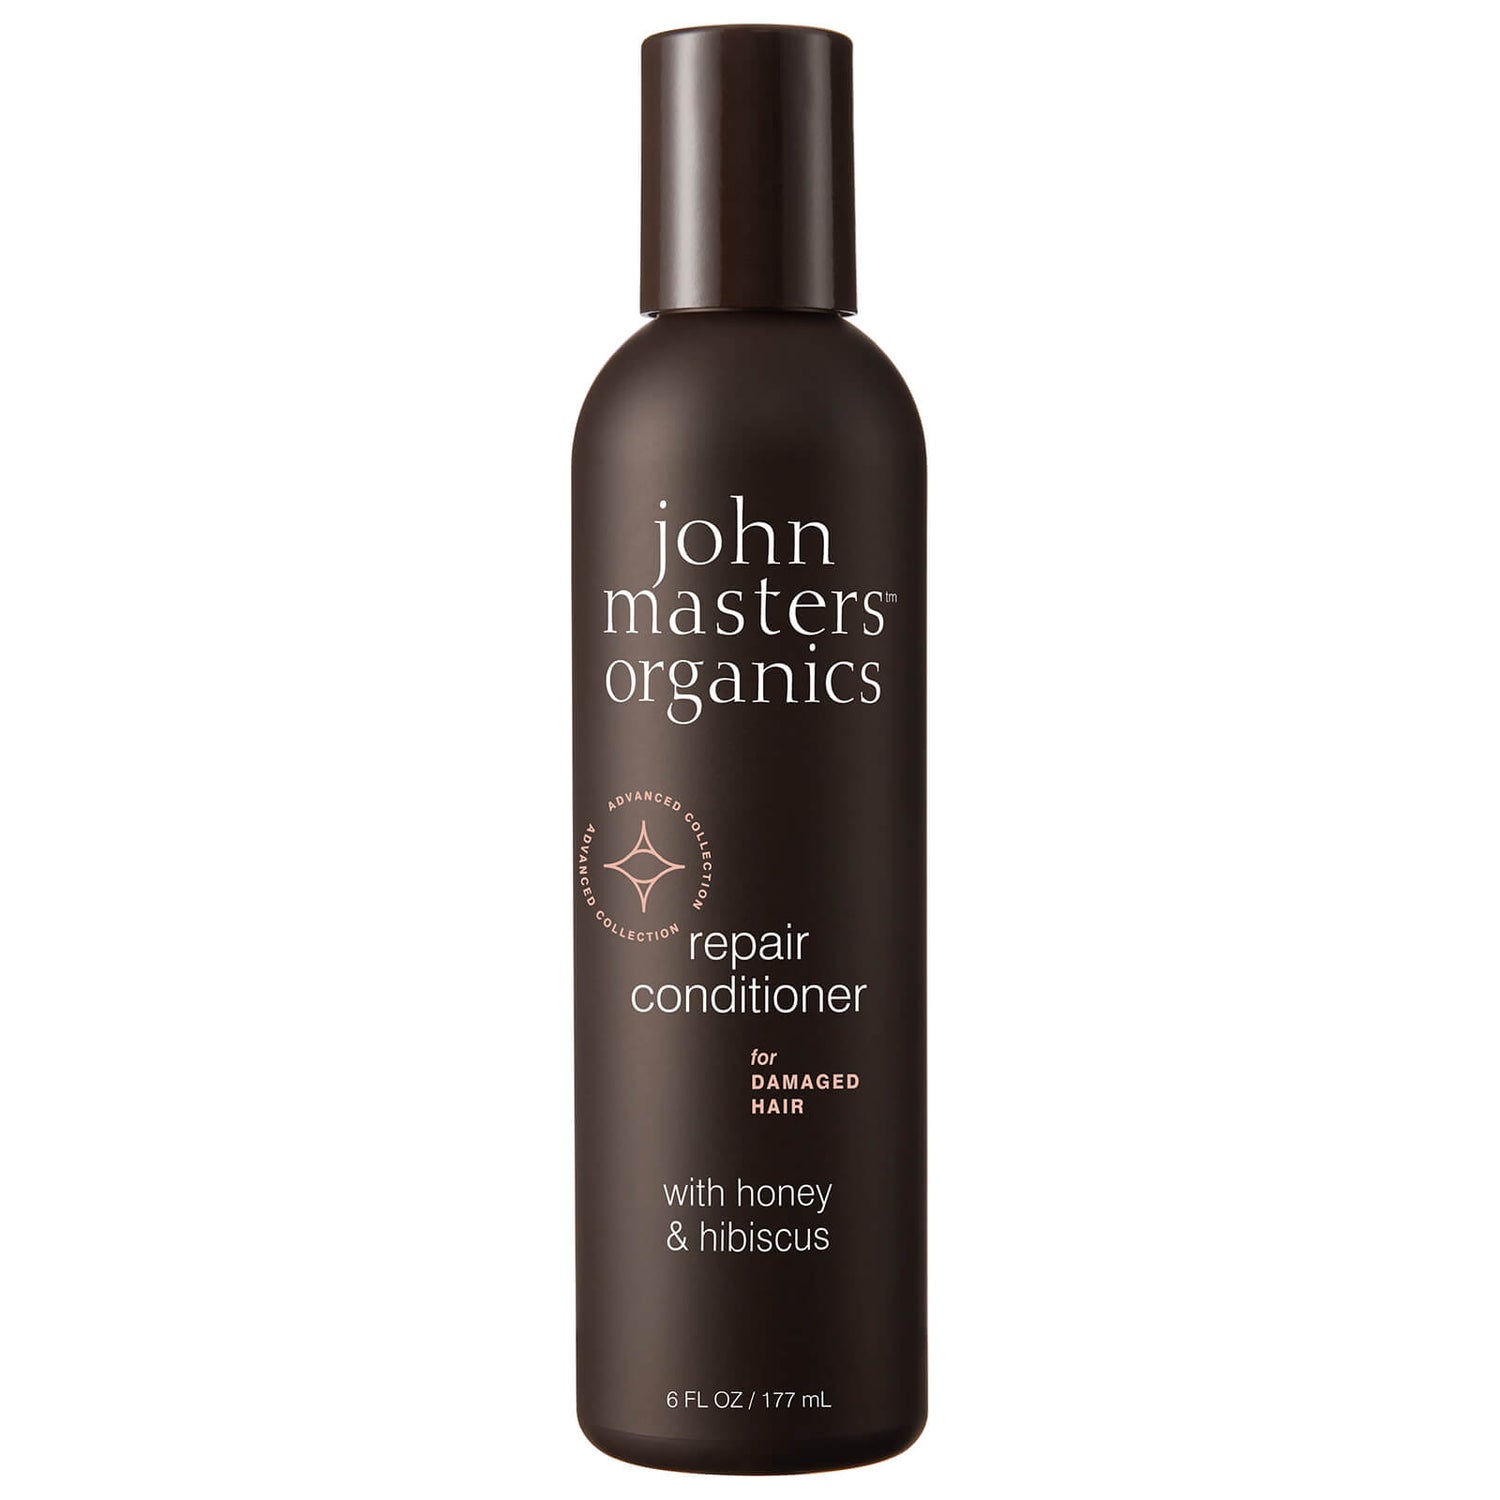 John Masters Organics Conditioner for Damaged Hair with Honey & Hibiscus 177ml